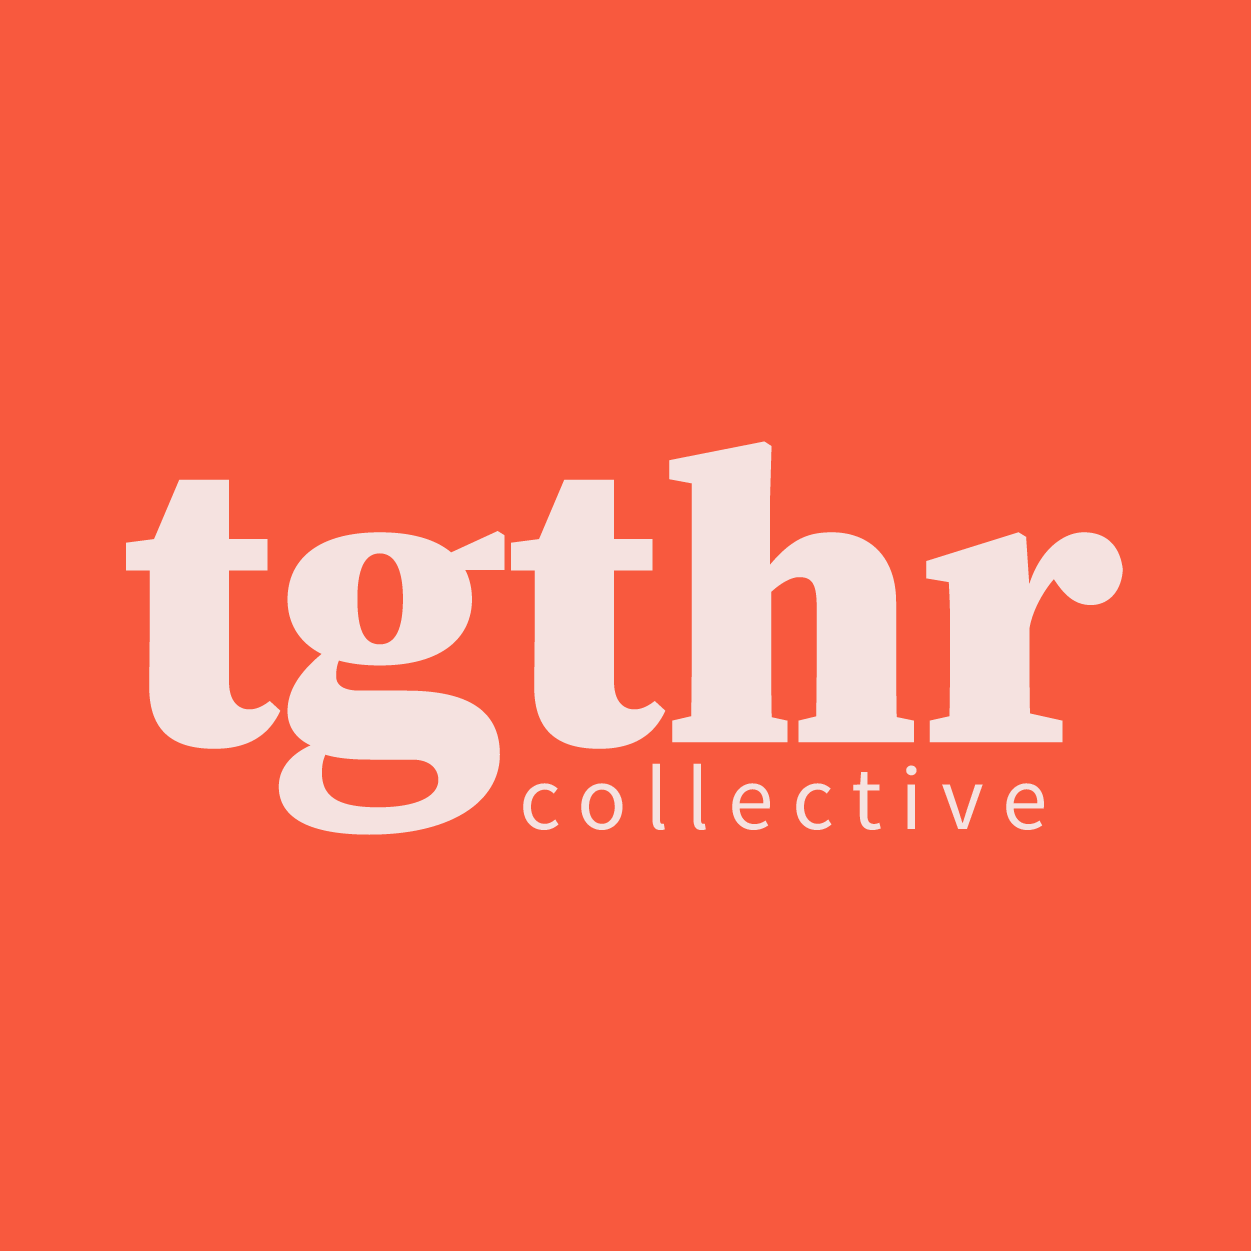 Tgthr Collective